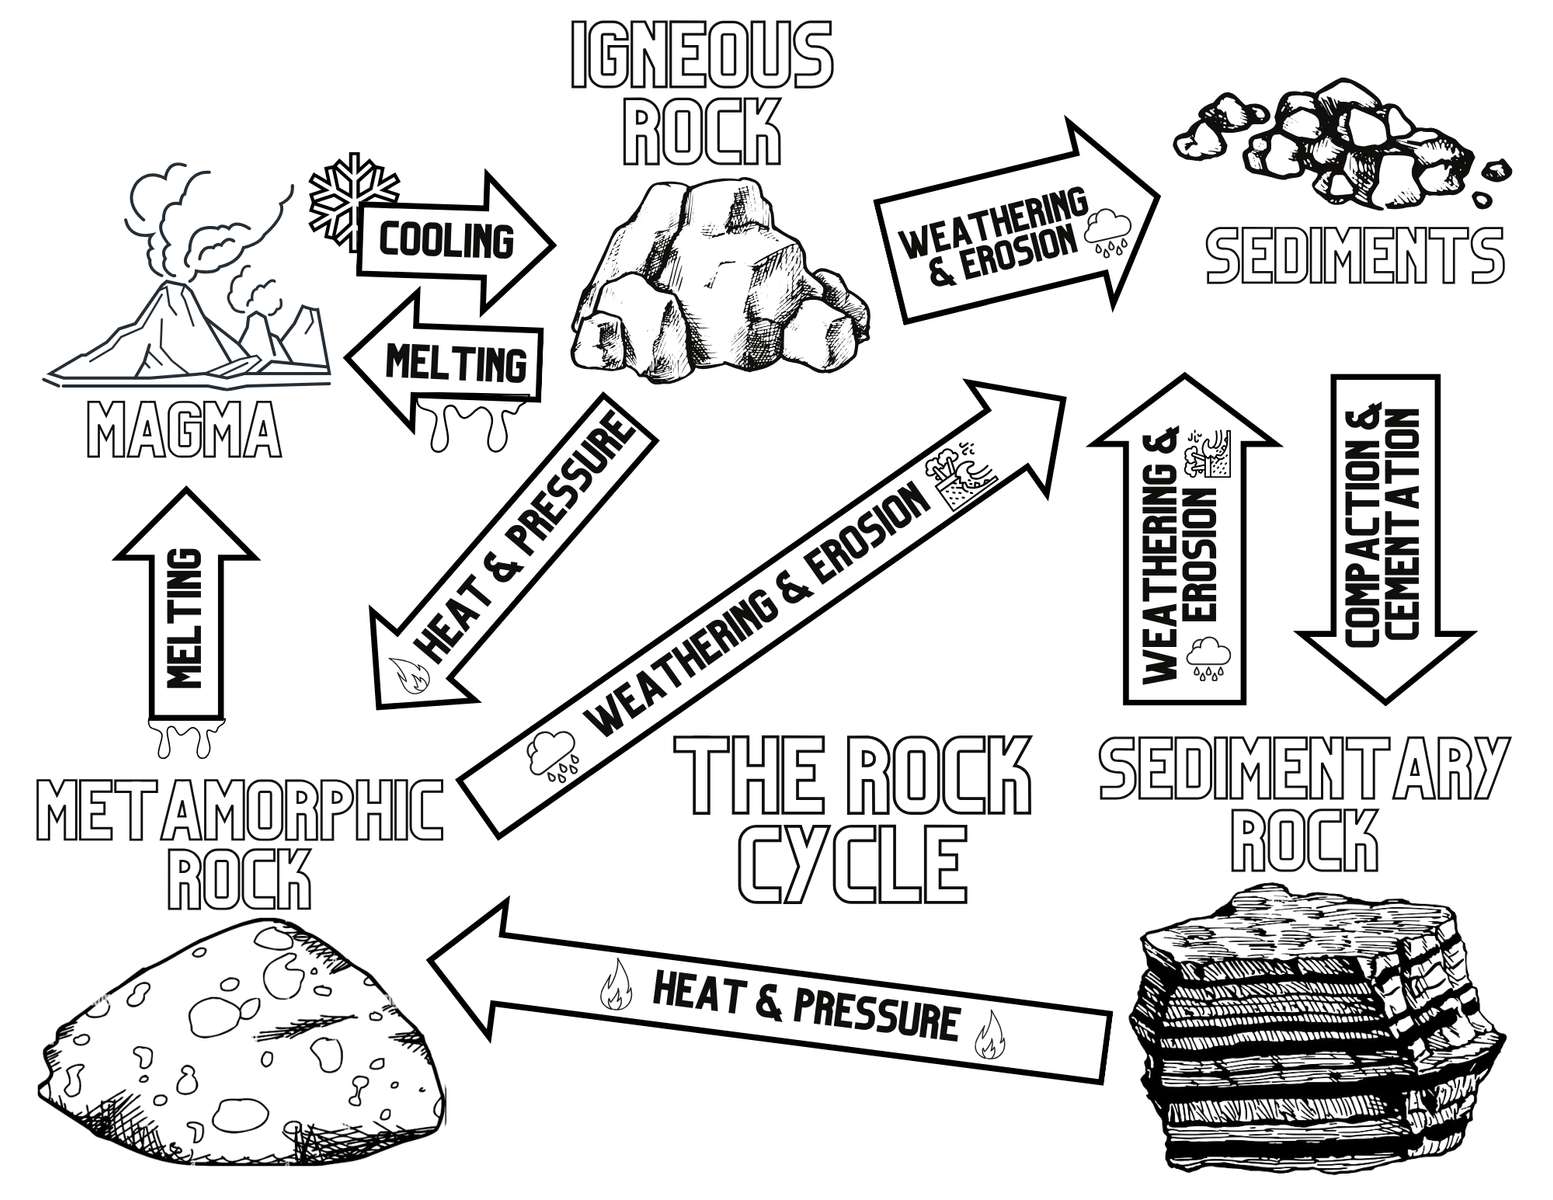 Rock Cycle online puzzle